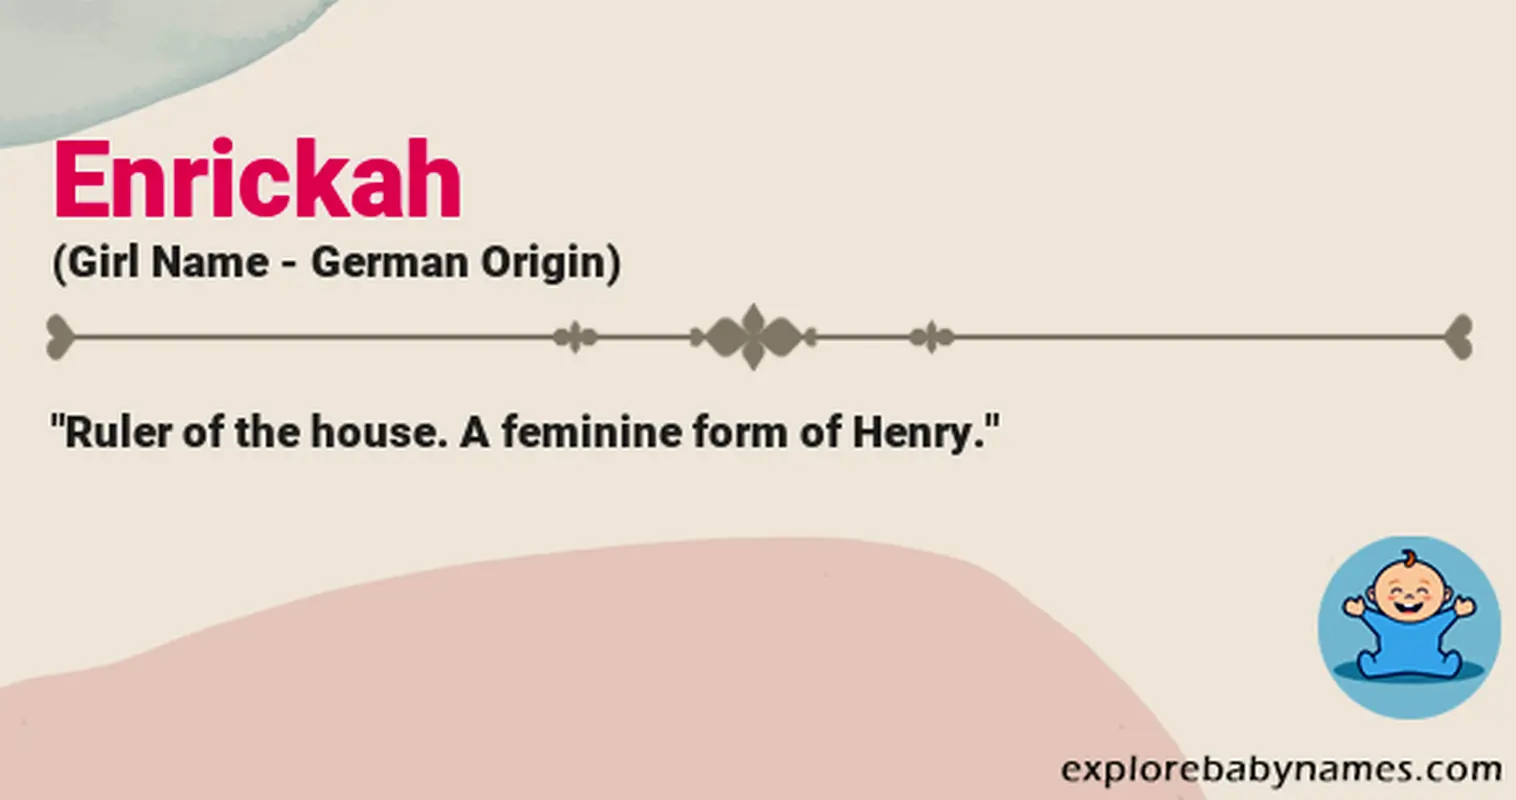 Meaning of Enrickah